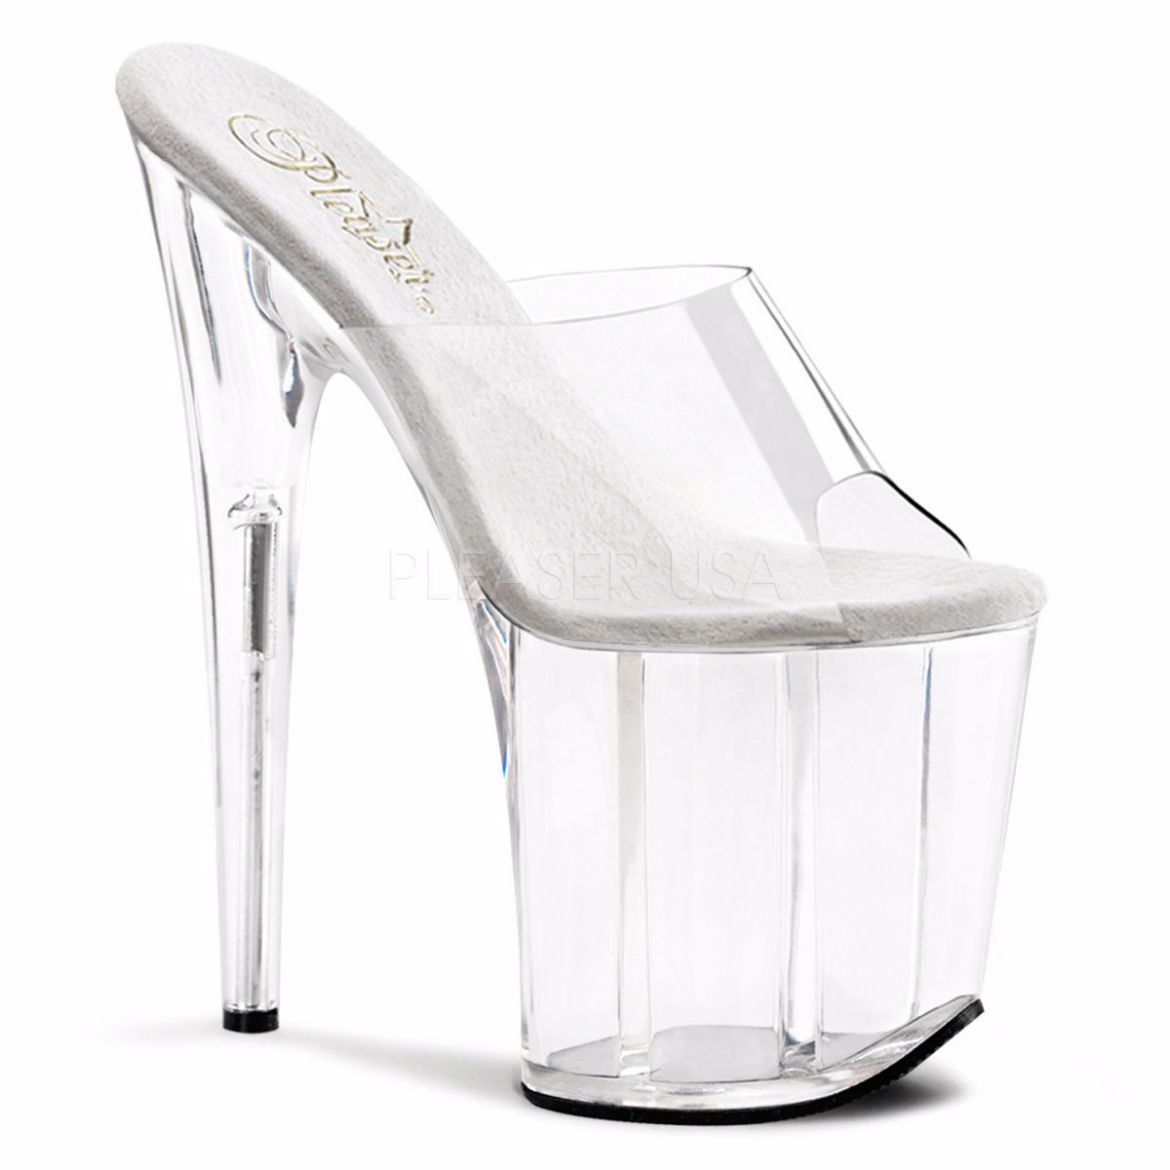 Product image of Pleaser Flamingo-801 Clear/Clear, 8 inch (20.3 cm) Heel, 4 inch (10.2 cm) Platform Slide Mule Shoes